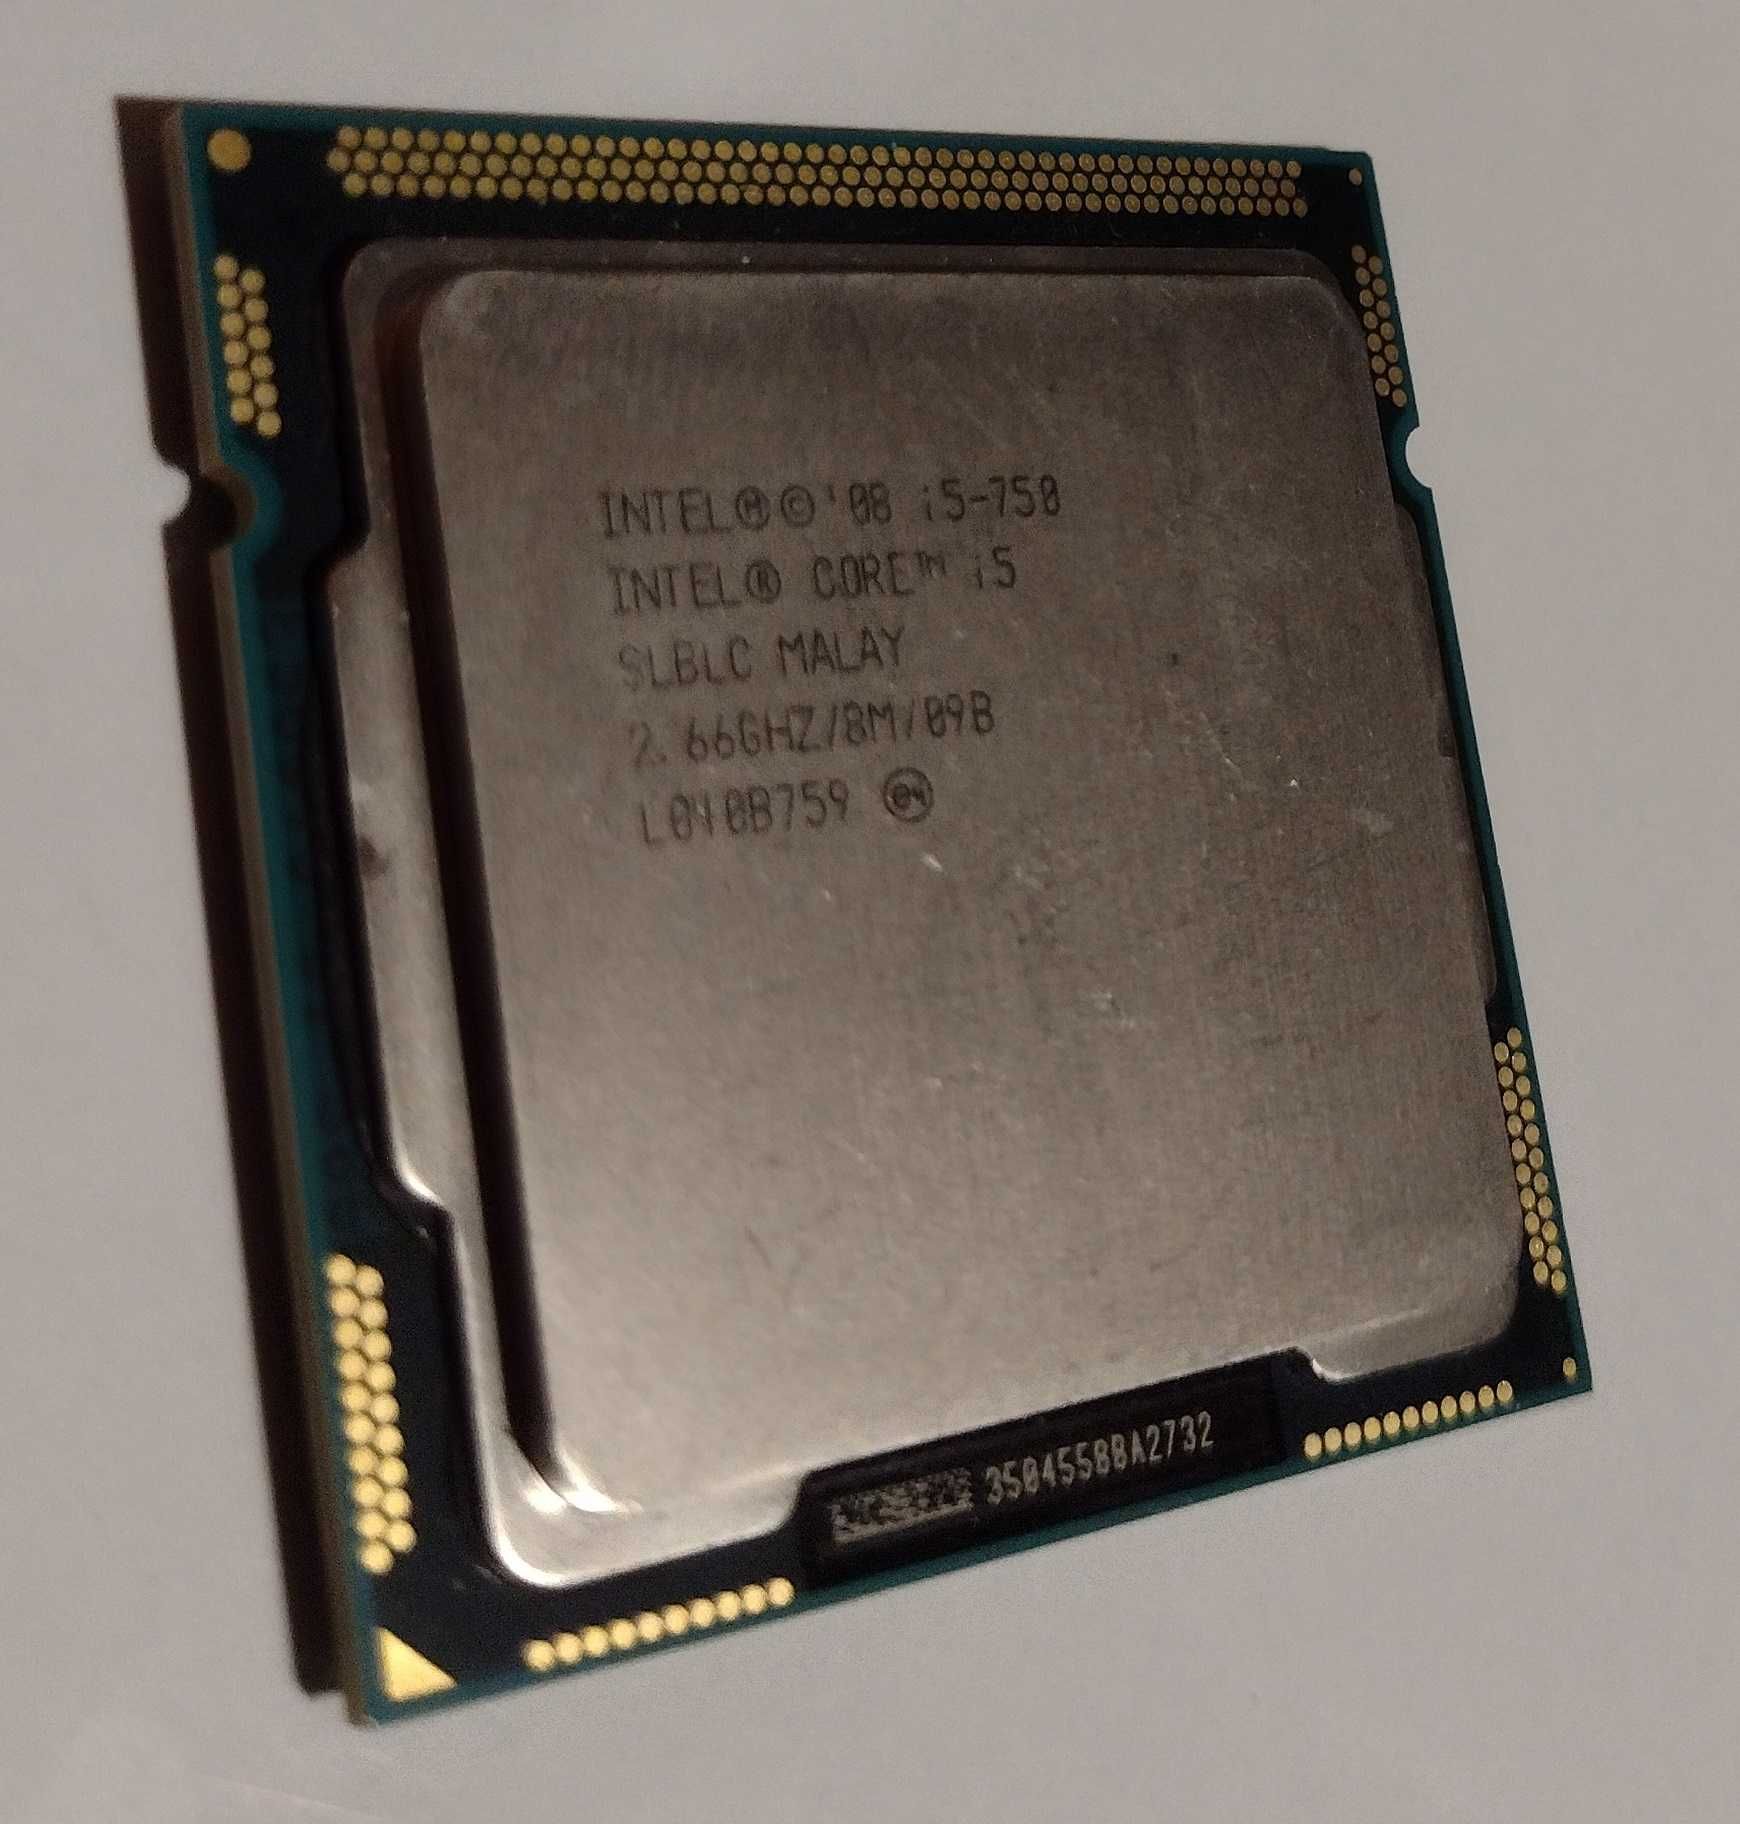 Vand Procesor Intel® Core™ i5-750, 2.66 GHz up to 3.2 GHz, sk.1156, 8M